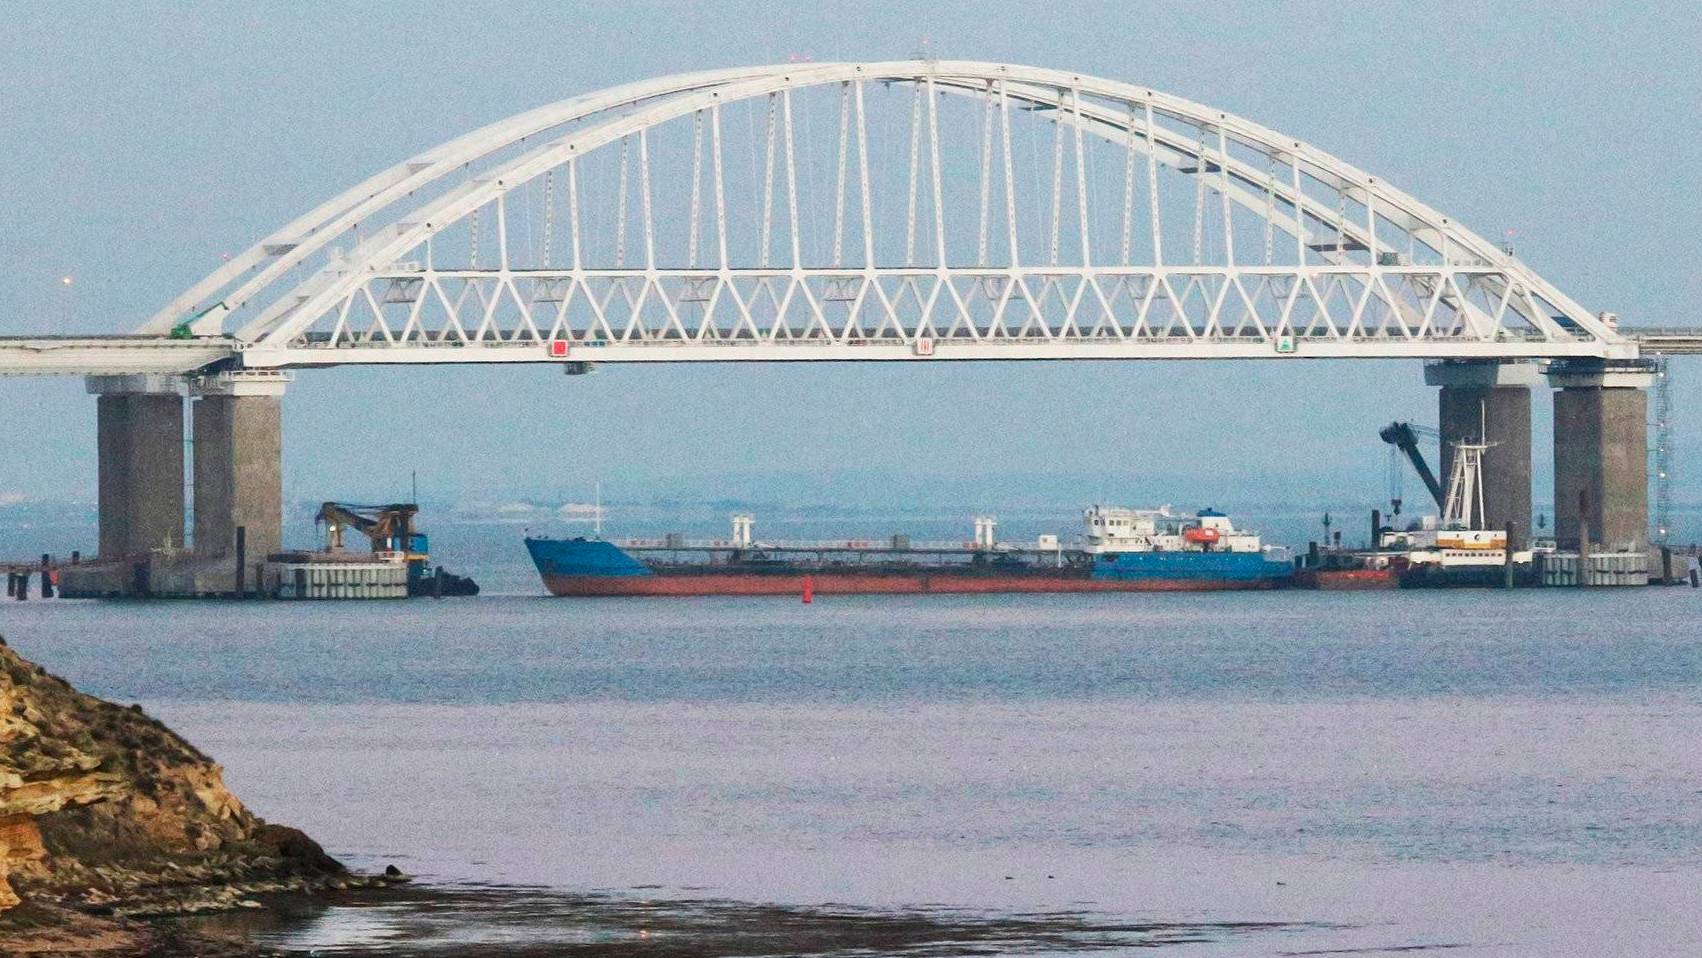 5711849 25.11.2018 A cargo ship blocks a passage under the arch of the Crimean bridge over Kerch Strait in Russia, November 25, 2018. On Sunday Russian authorities closed off the Kerch Strait after three Ukrainian naval ships had crossed the Russian border and entered the temporarily closed area of the Russian territorial waters. Andrej Krylov / Sputnik  via AP